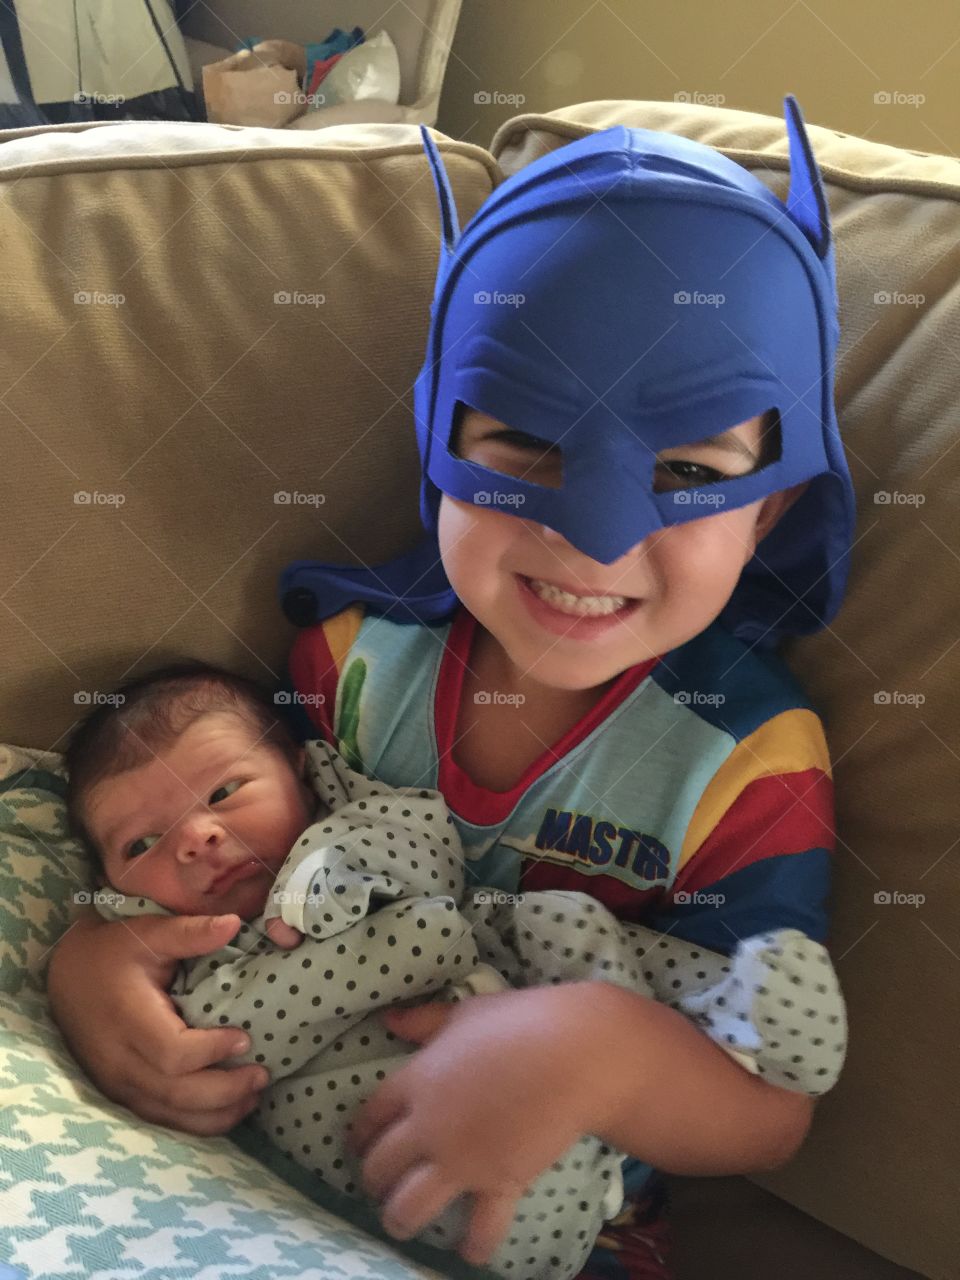 Brothers. Older brother with Batman mask on holding newborn brother. 